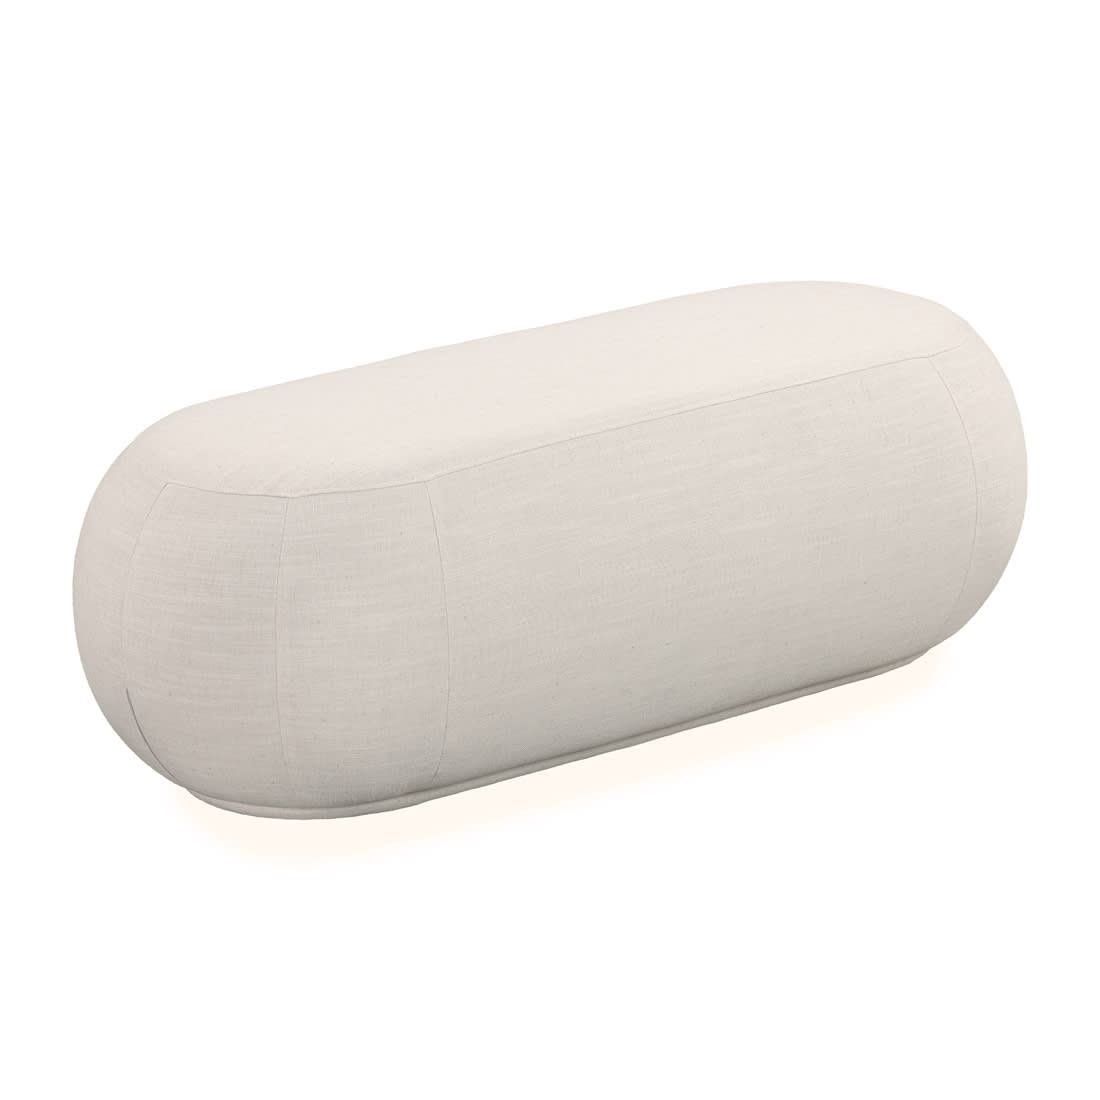 Puff Oval Ottoman - Siena 903 Cream - Angle View by RJ Living